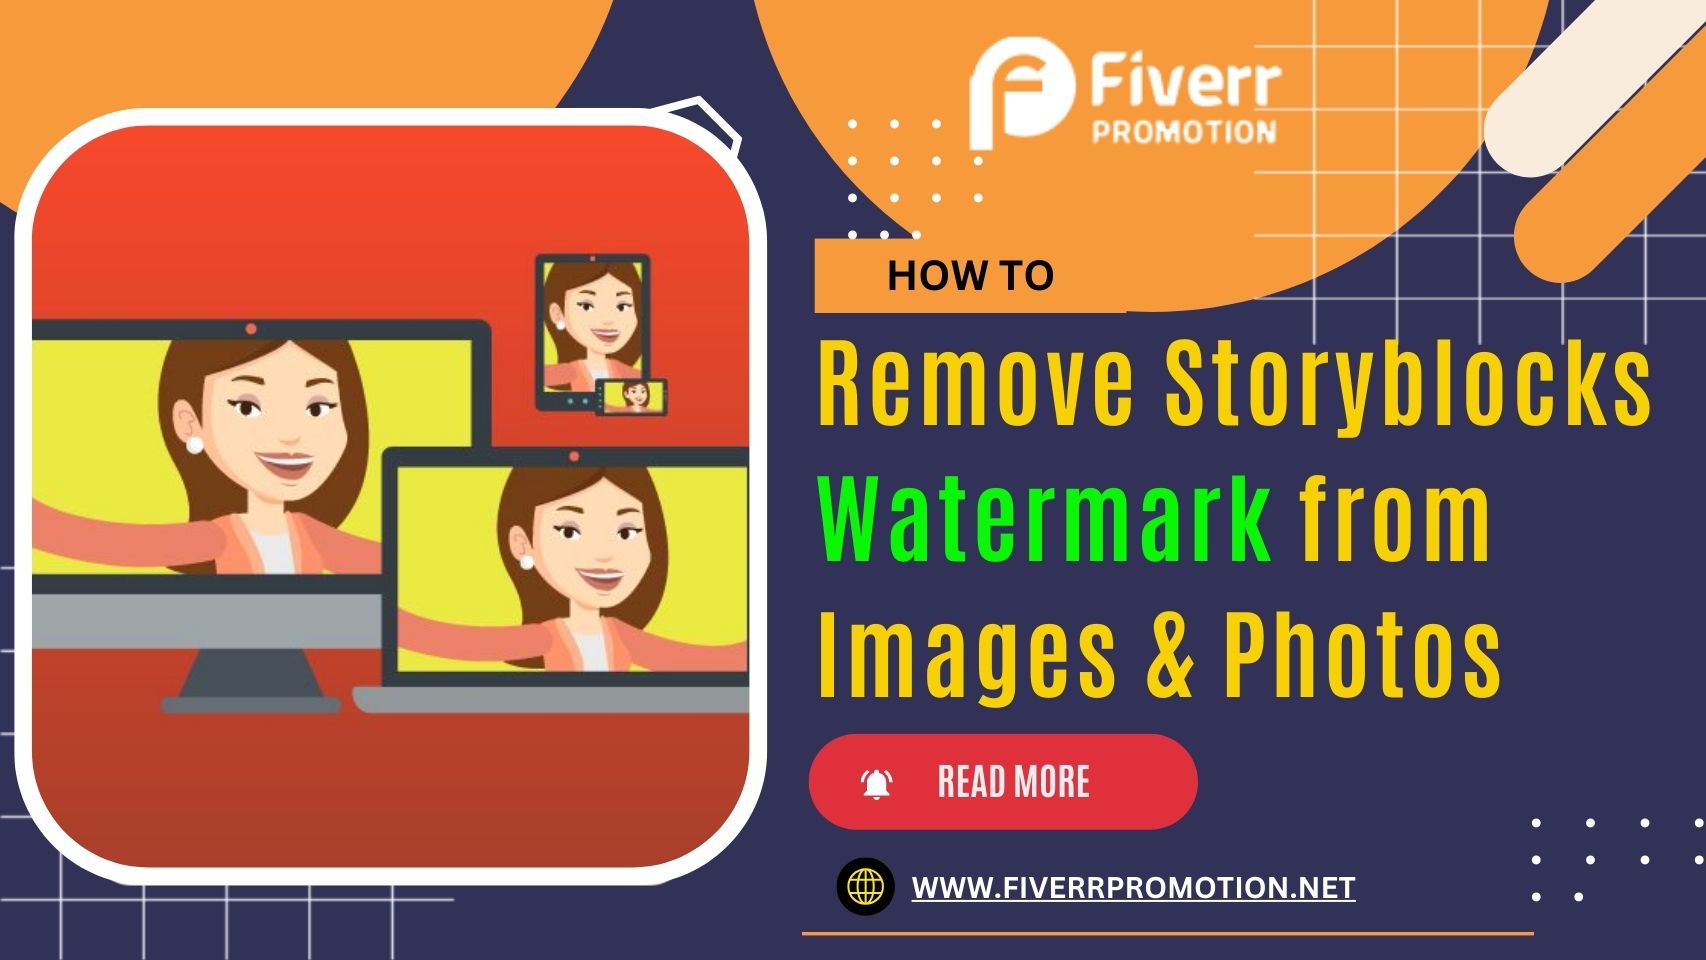 How to Remove Storyblocks Watermark from Images & Photos